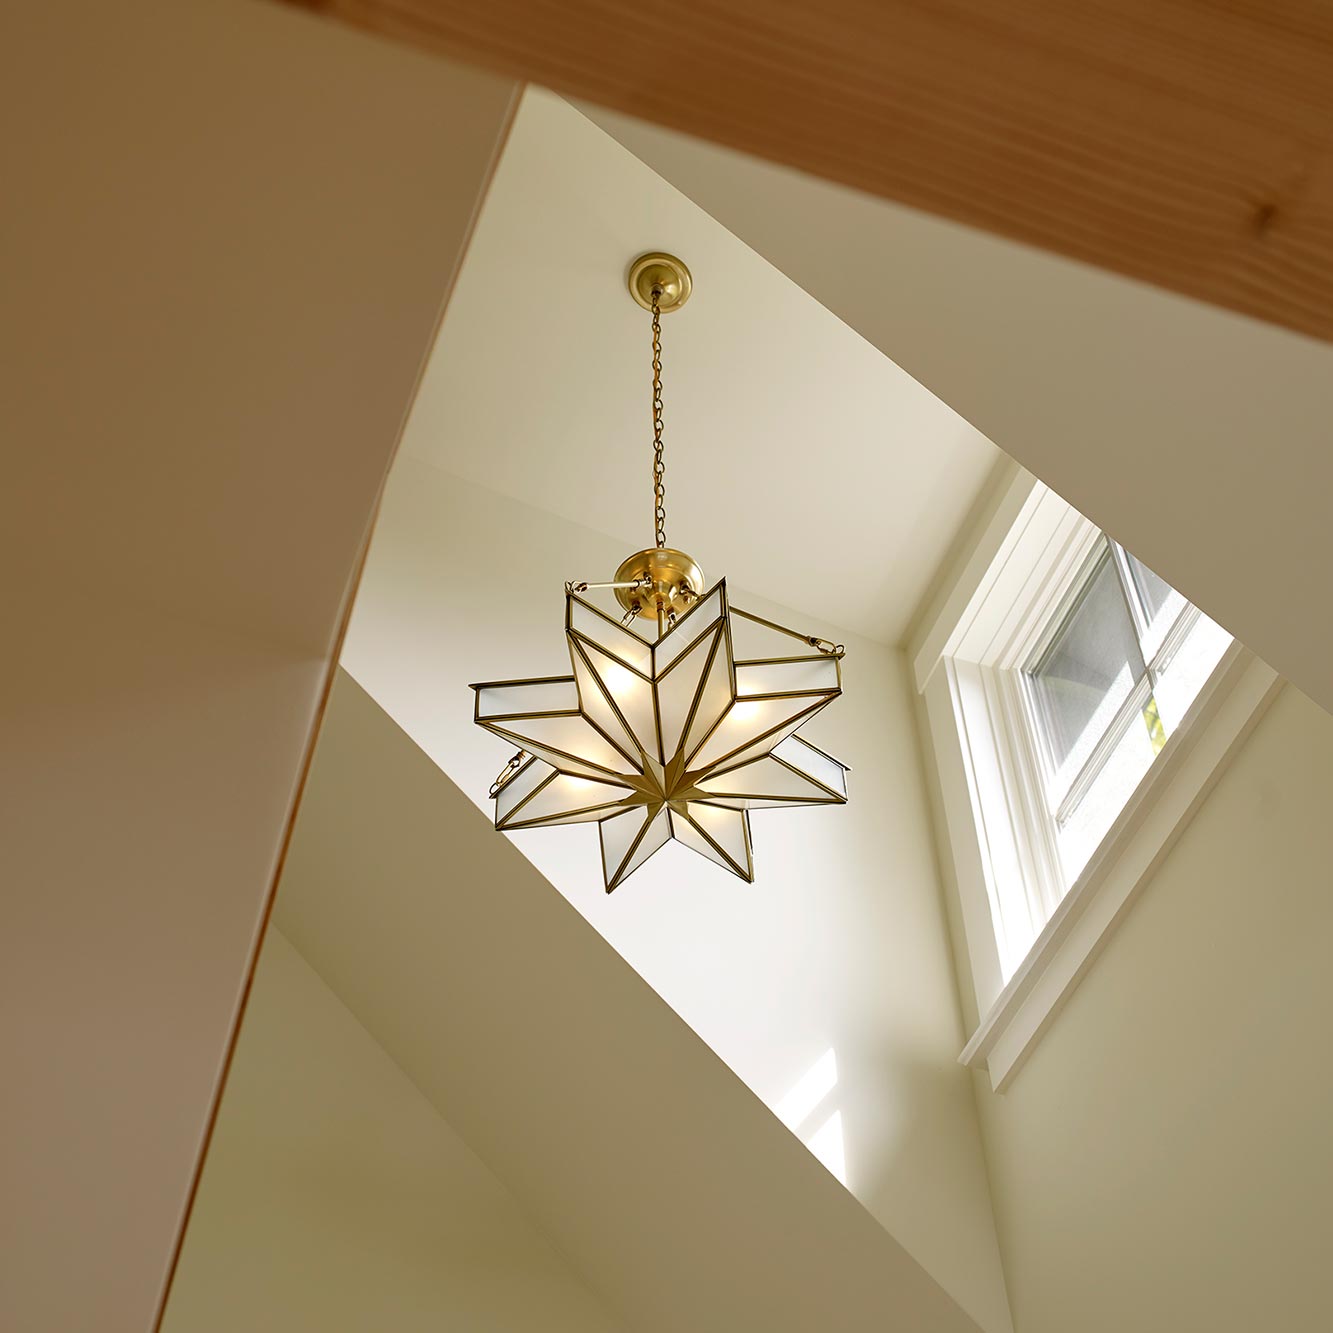 Star-shaped chandelier from the double height ceiling